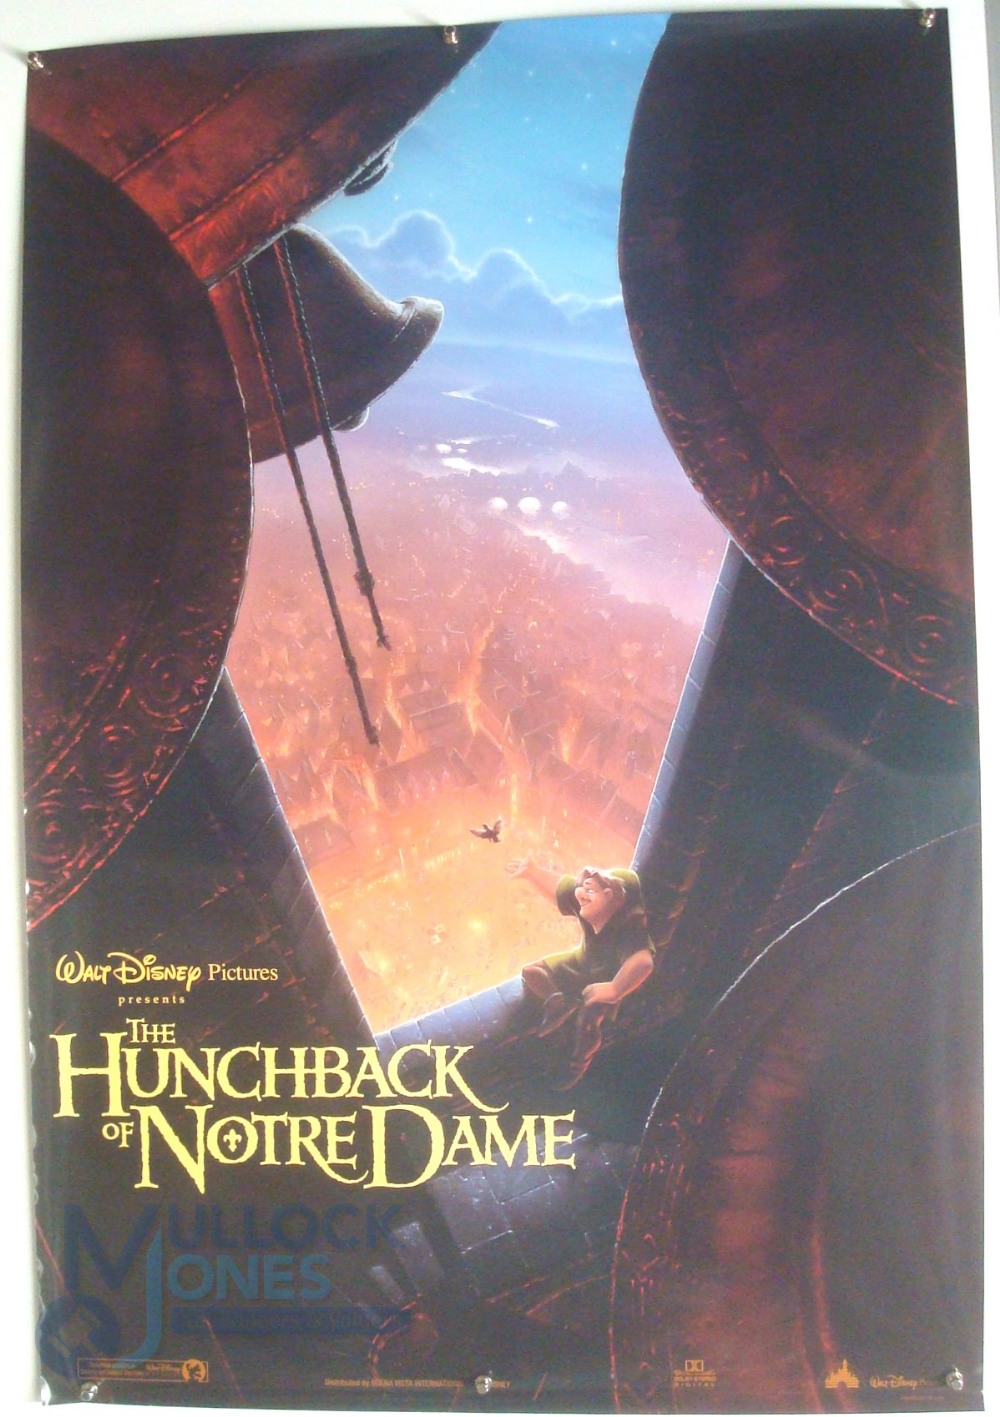 Original Movie/Film Poster - 1996 Hunchback of Notre Dame - 40x30" approx. kept rolled, creases